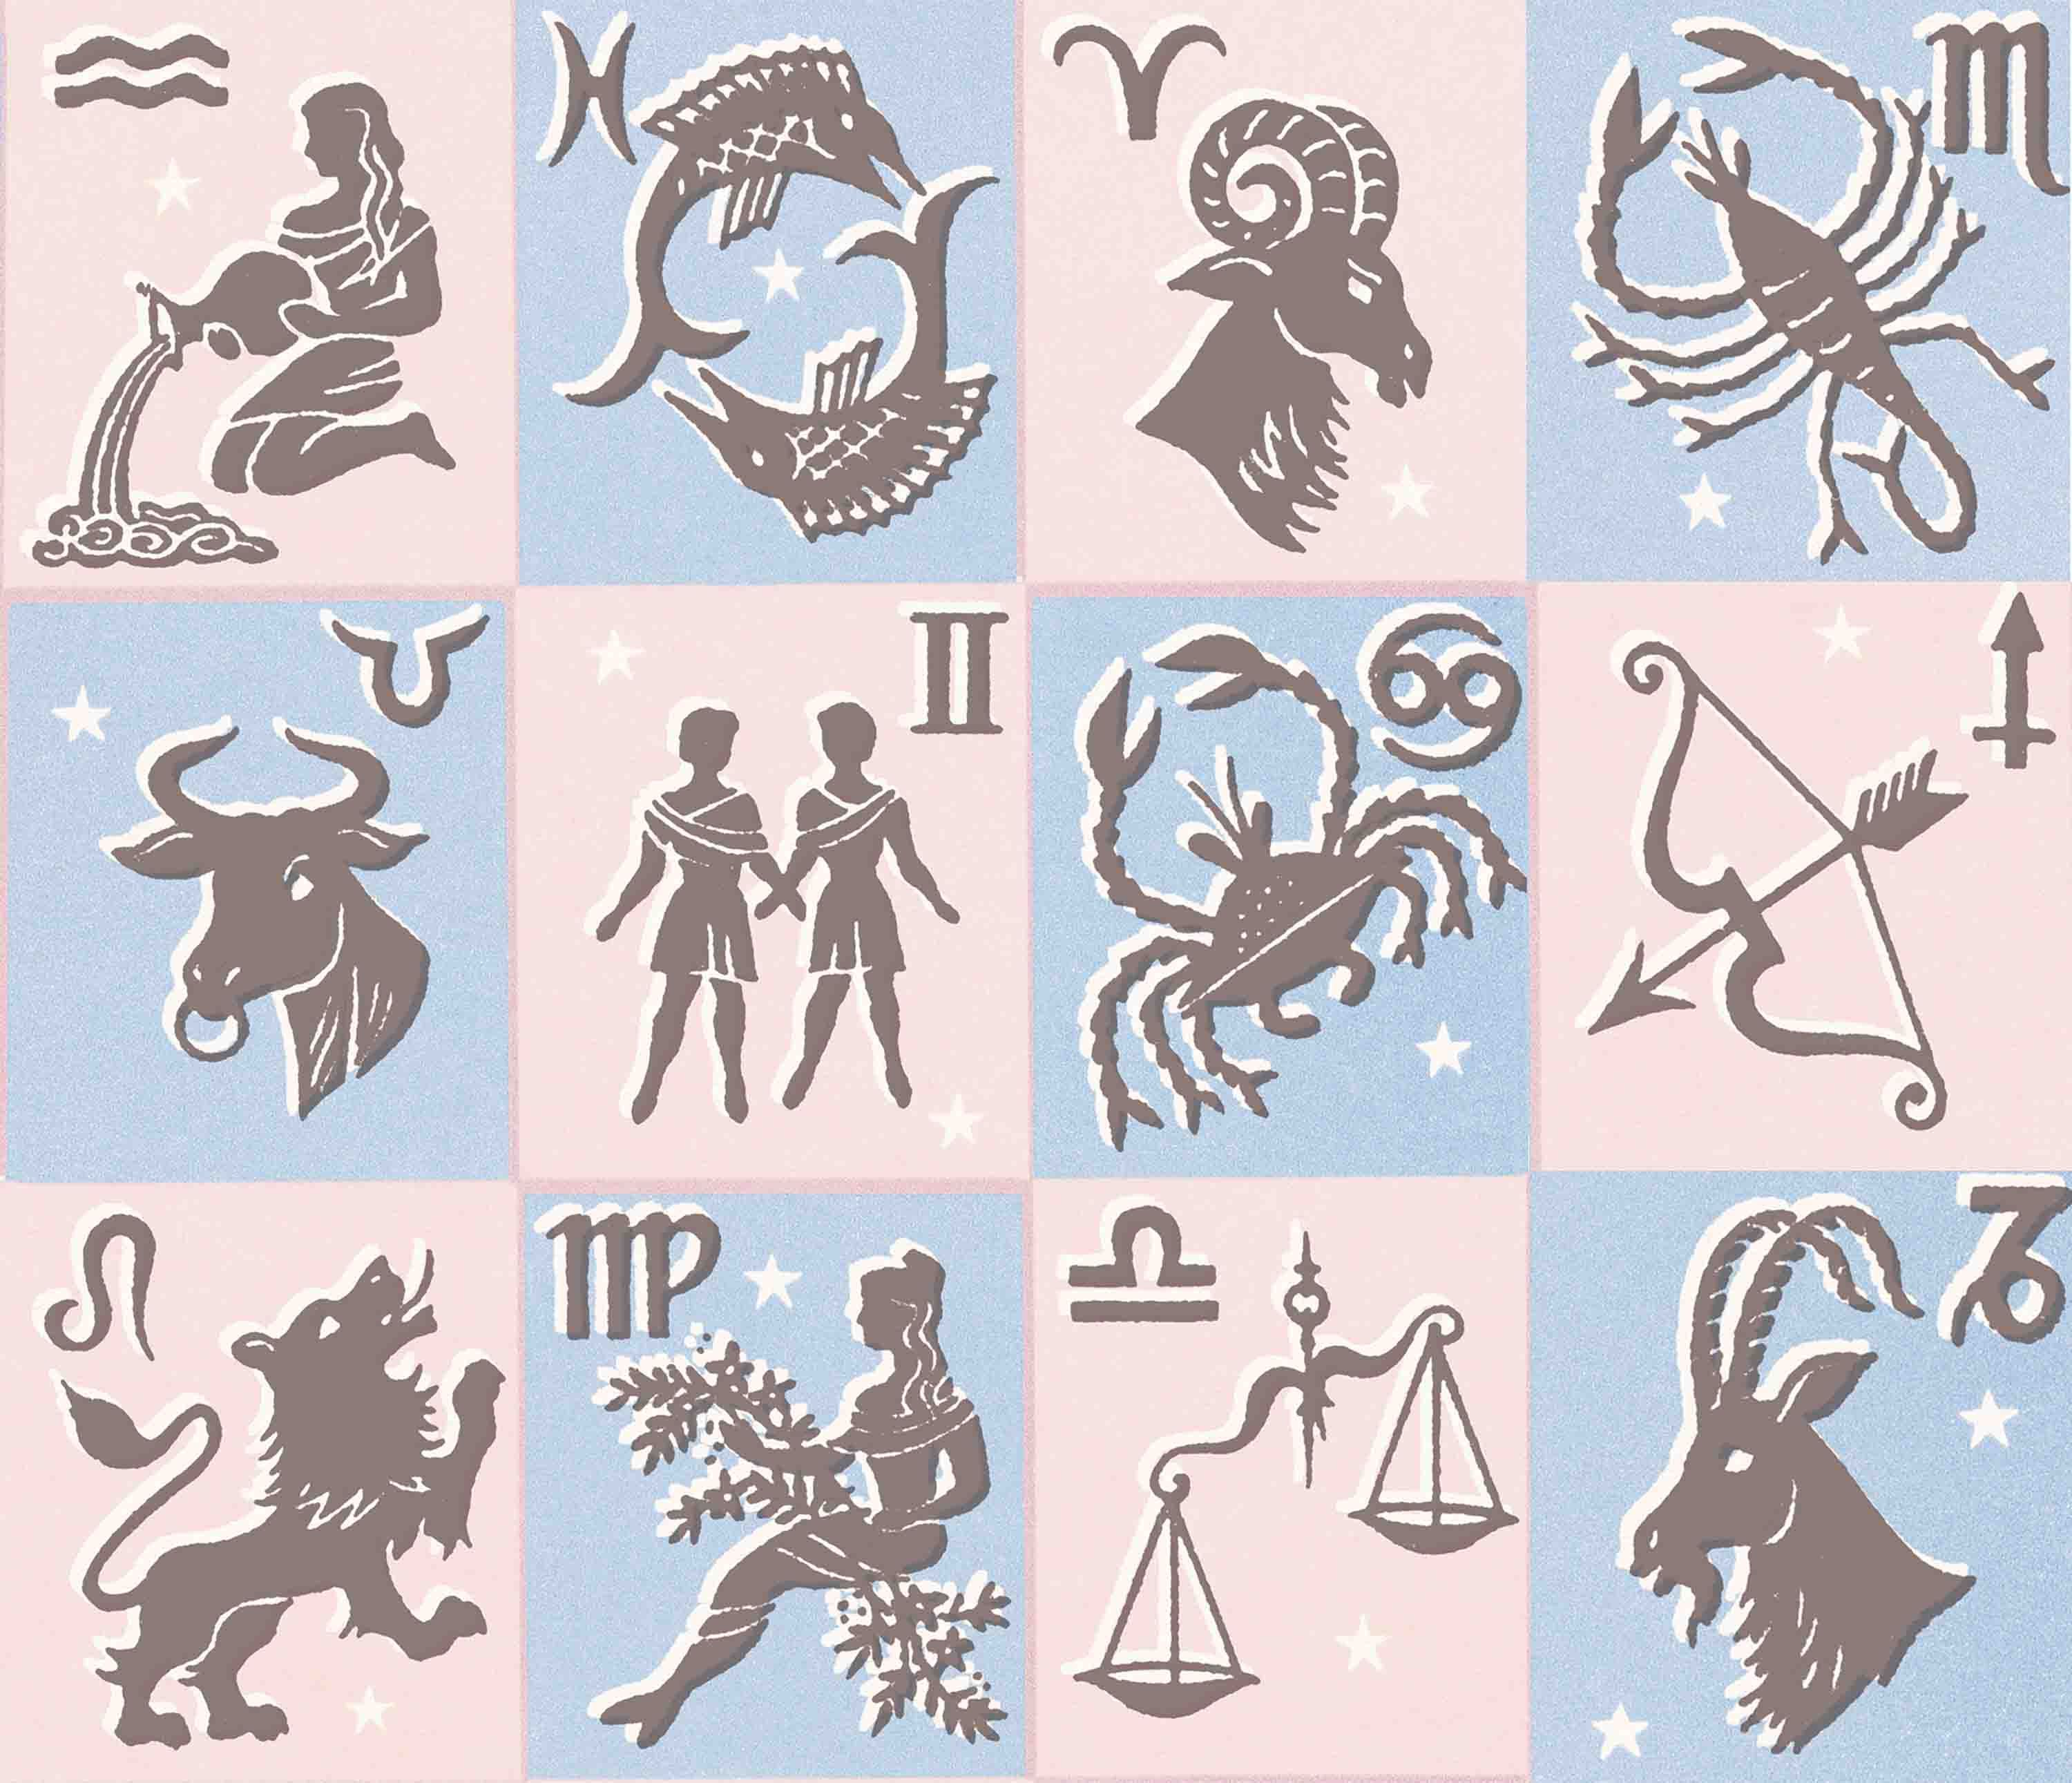 Your Next Tattoo Based On Your Astrological Sign  Society19